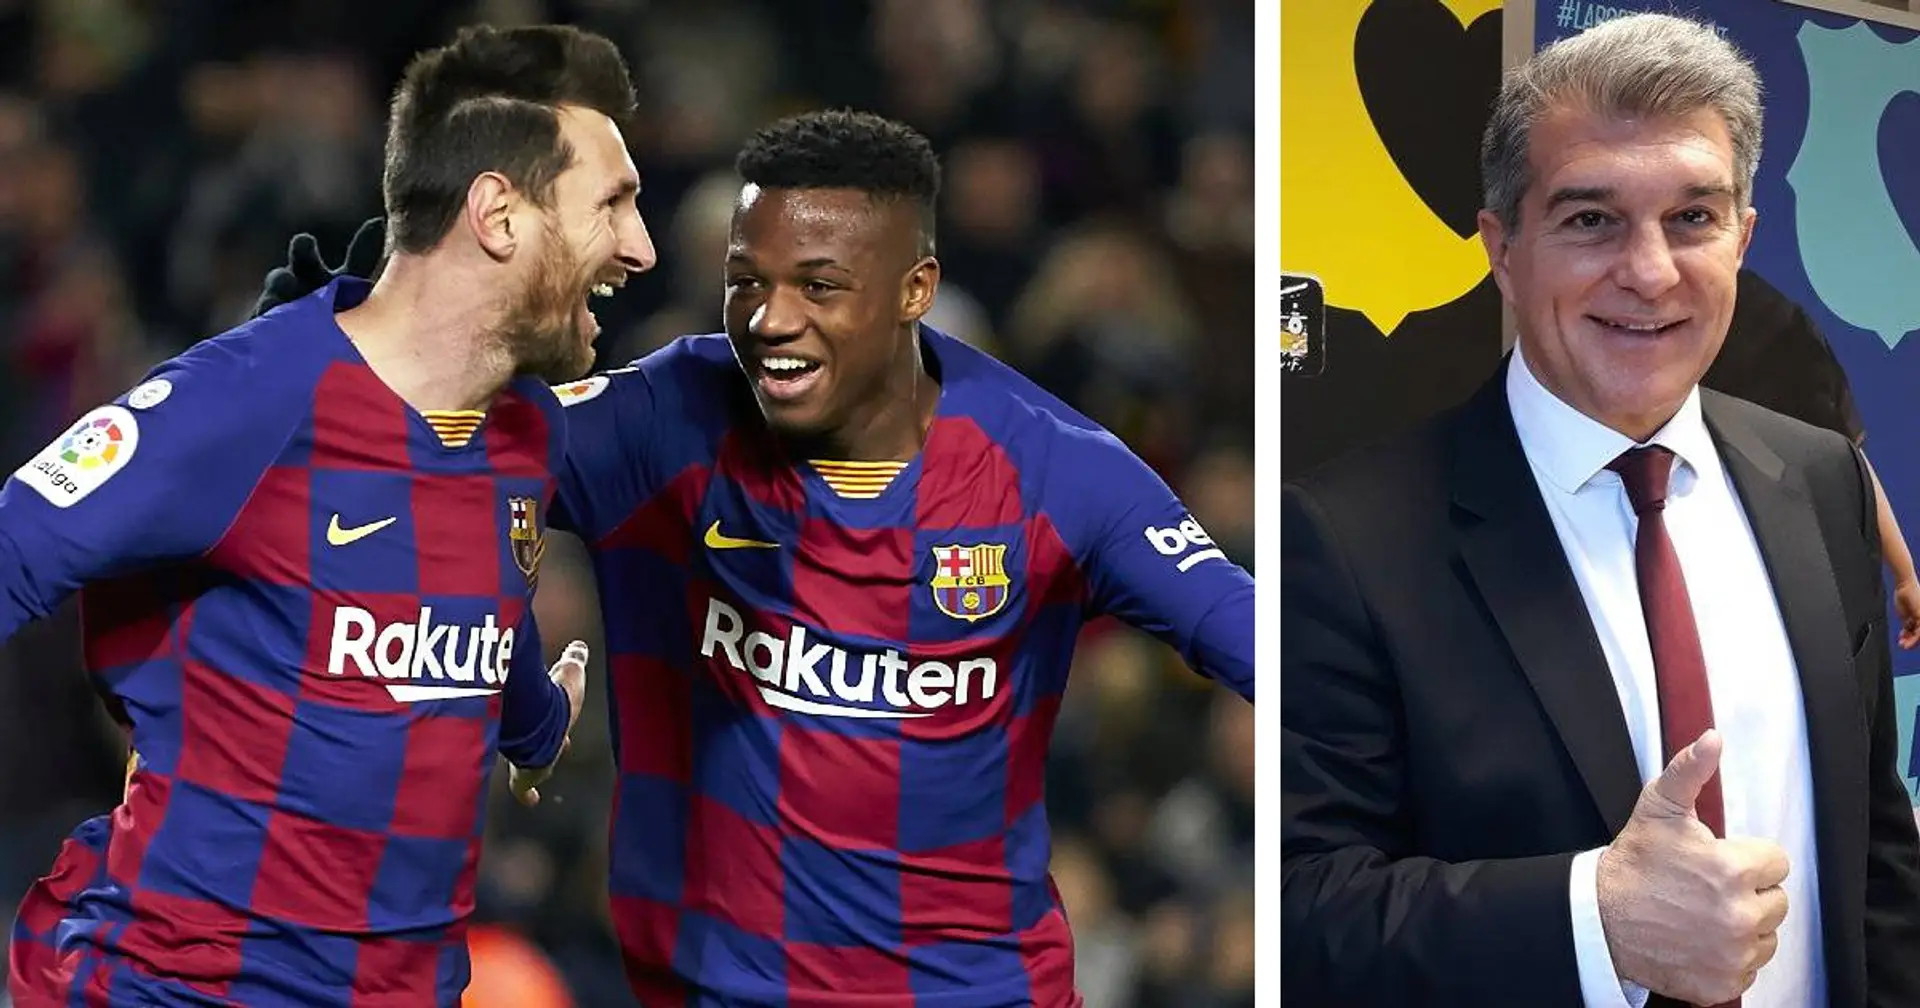 Joan Laporta explains why it's wrong to call Fati 'the new Messi'